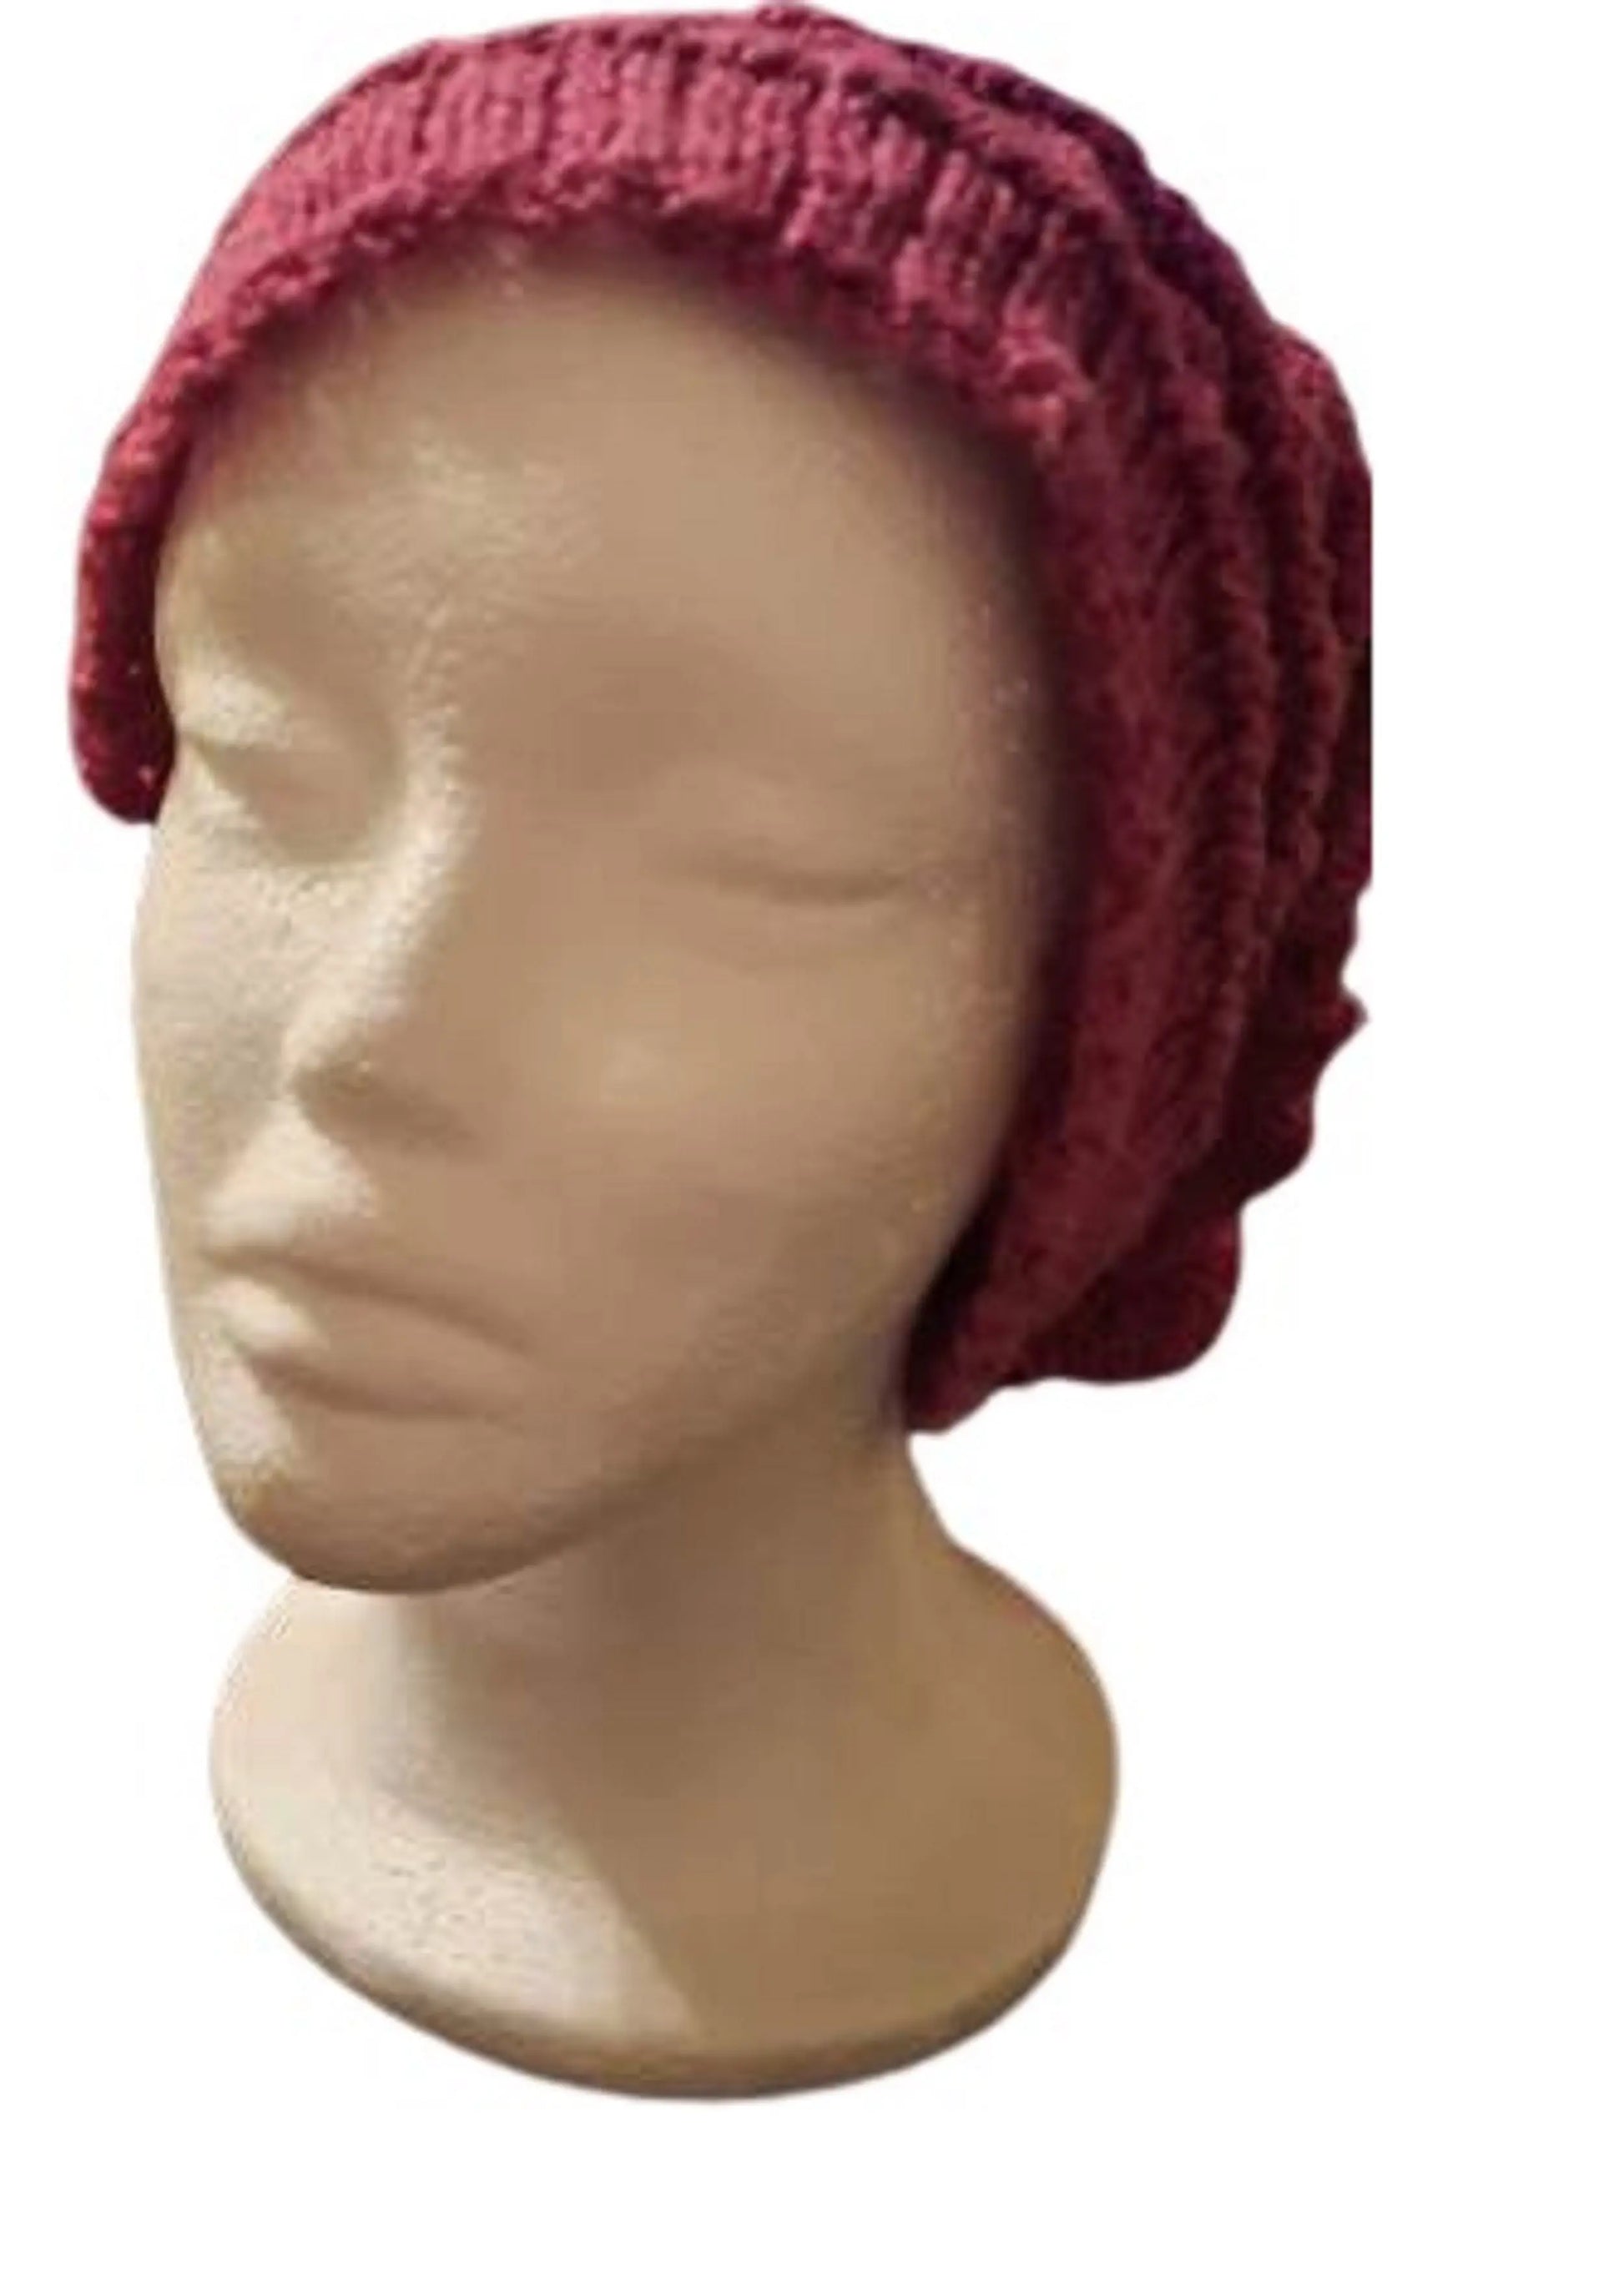 "Enchanting Burgundy Pixie Hat: Hand Knitted Delight for Your Adventurous Spirit" - Image #2